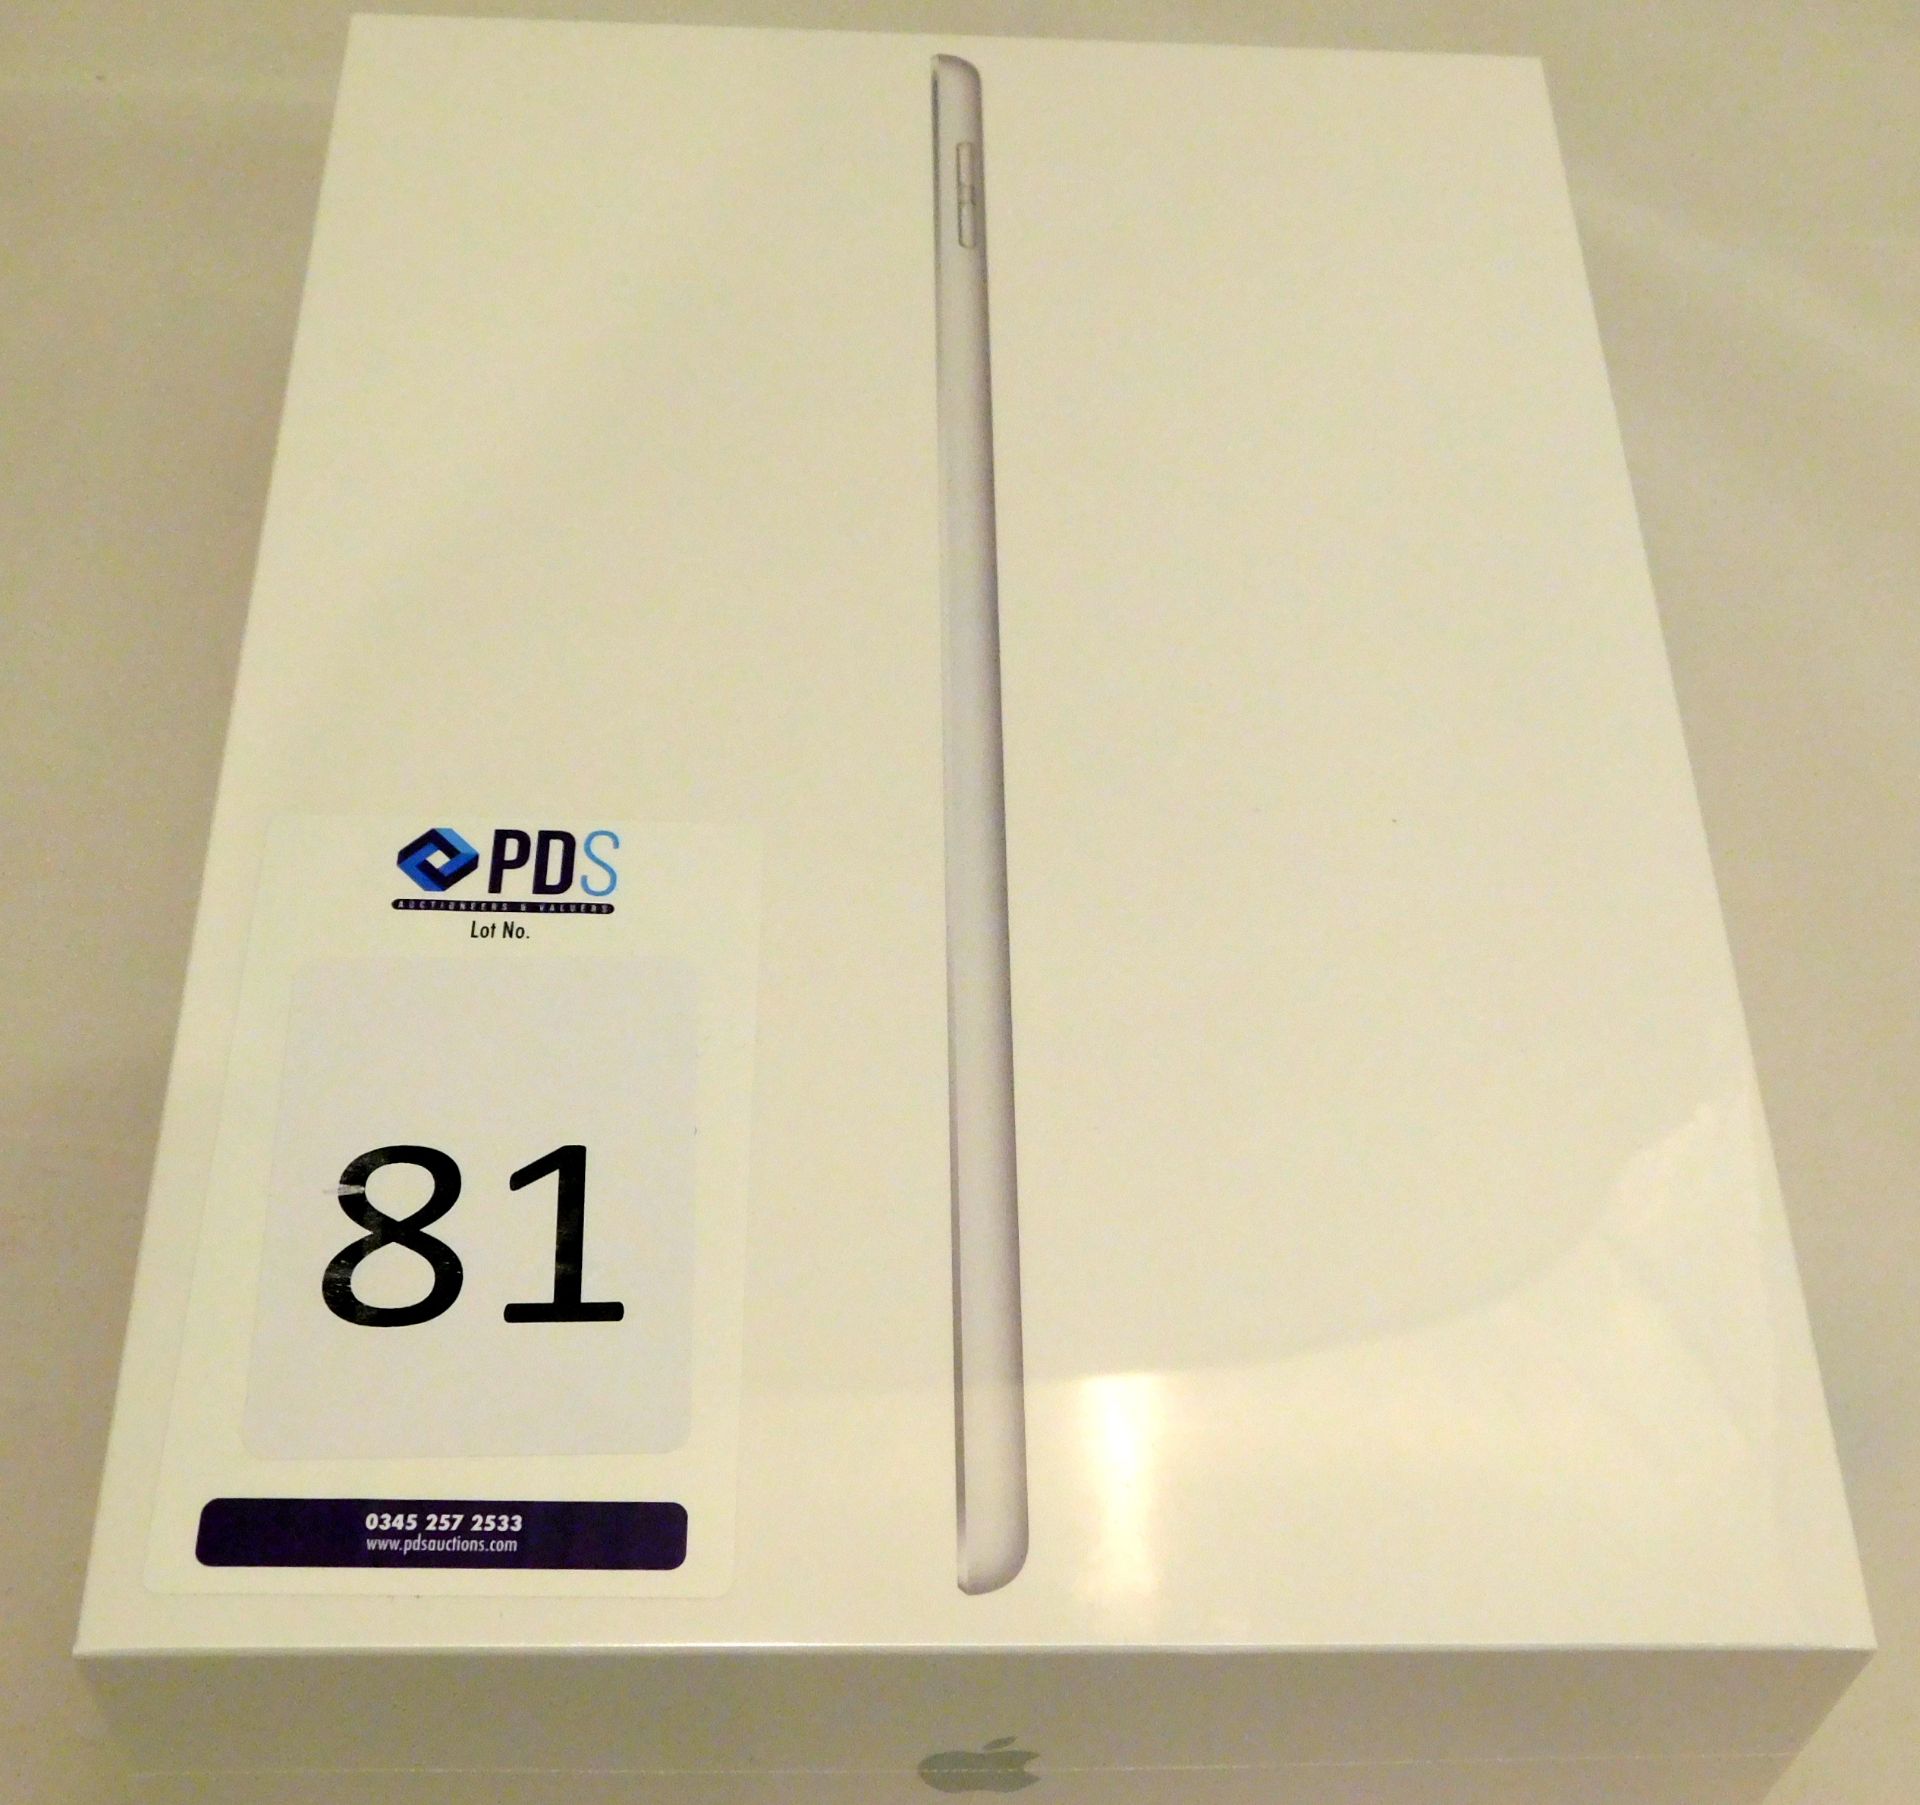 Apple A2197 iPad, 7th Gen, 32GB, Silver, Serial Number: DMPC80YZMF3N, (New in Sealed Box) (Located